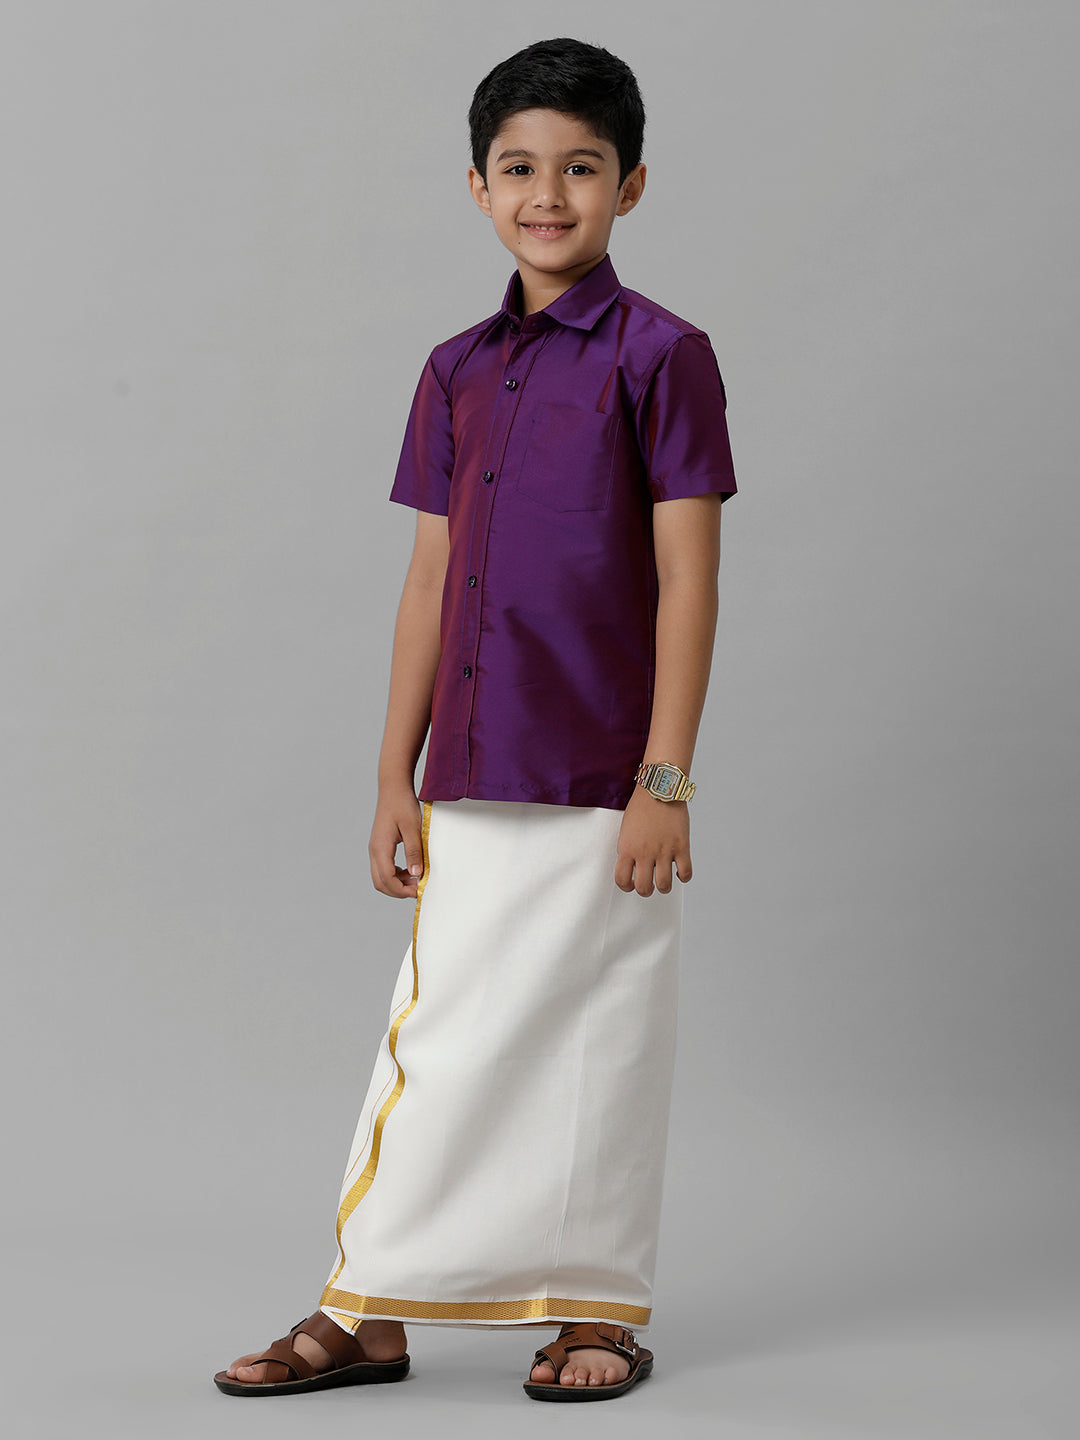 Boys Silk Cotton Violet Half Sleeves Shirt with Adjustable Cream Dhoti Combo K21-Side view